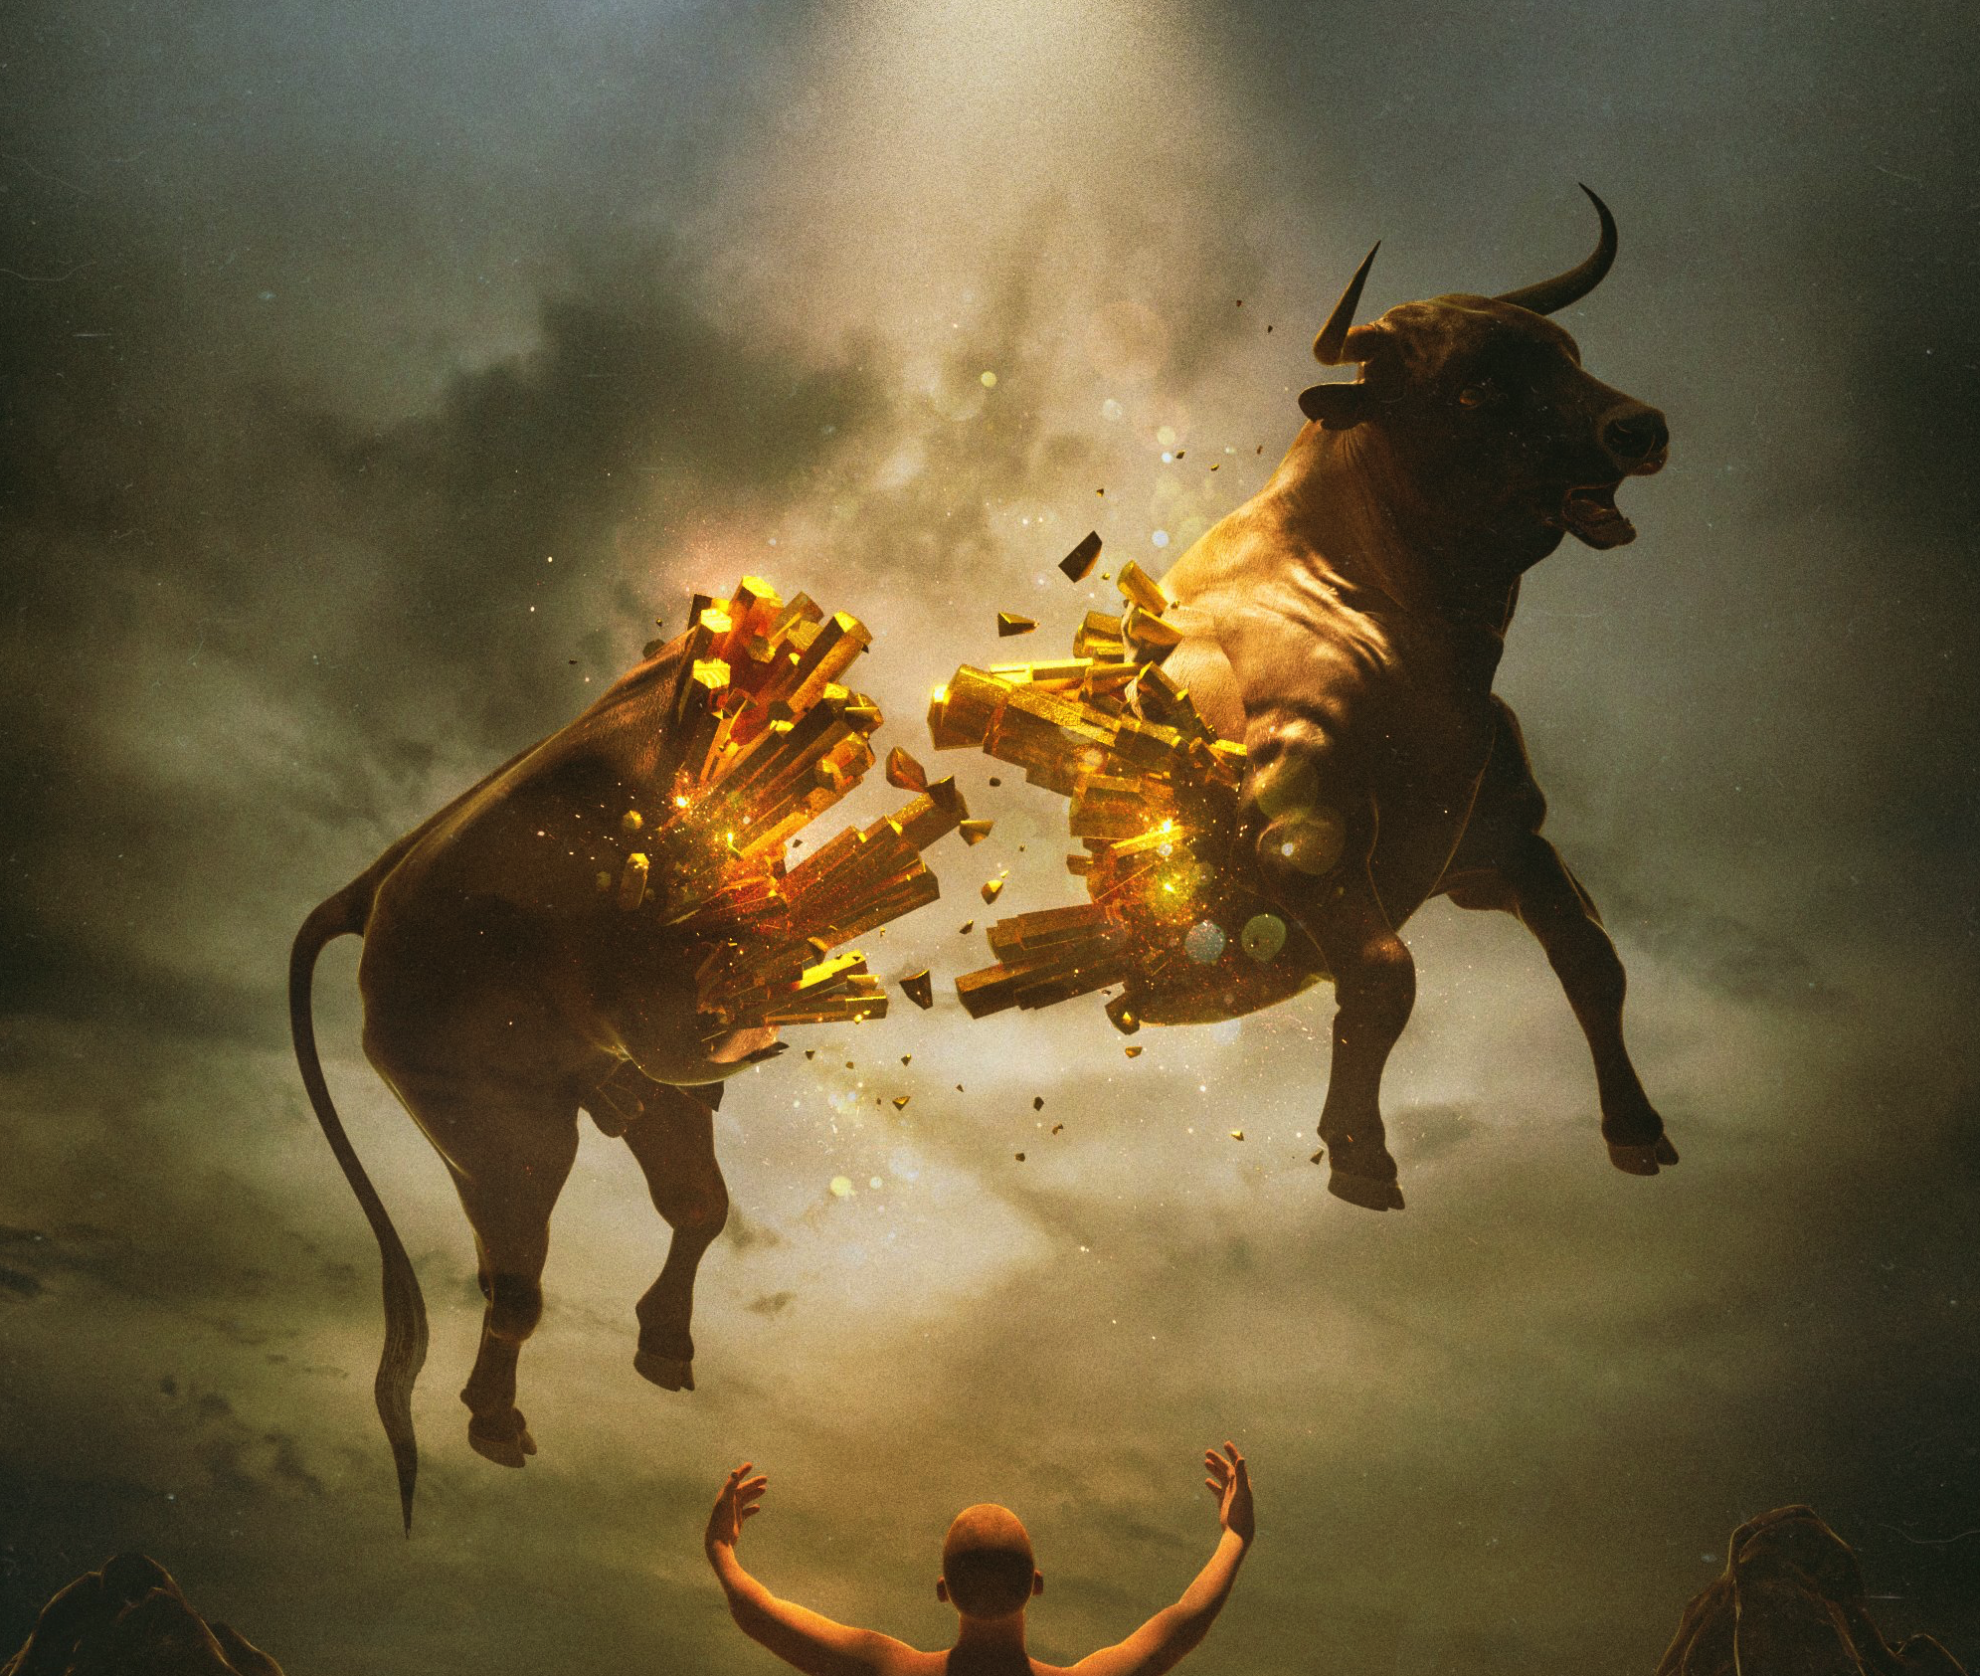 crypto art by beeple featuring a bull being ripped in half by a wizard man